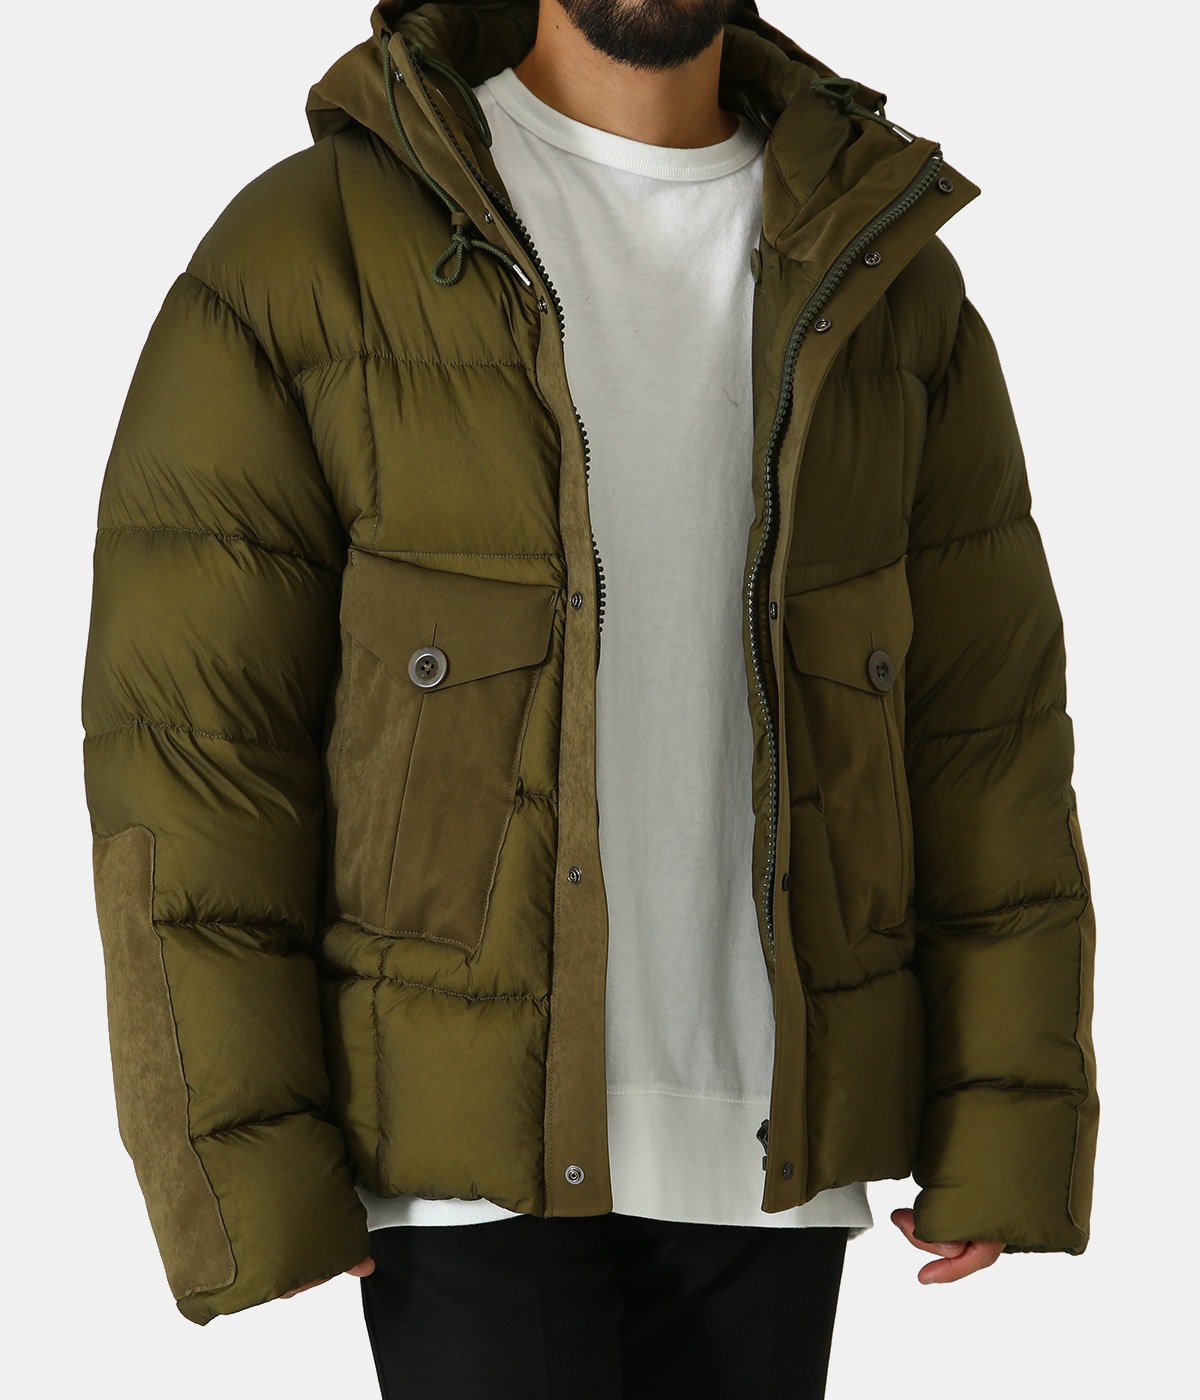 TEMPEST COMBO DOWN JACKET PIECE DYED NYLON CRINKLE RIP STOP DOWN